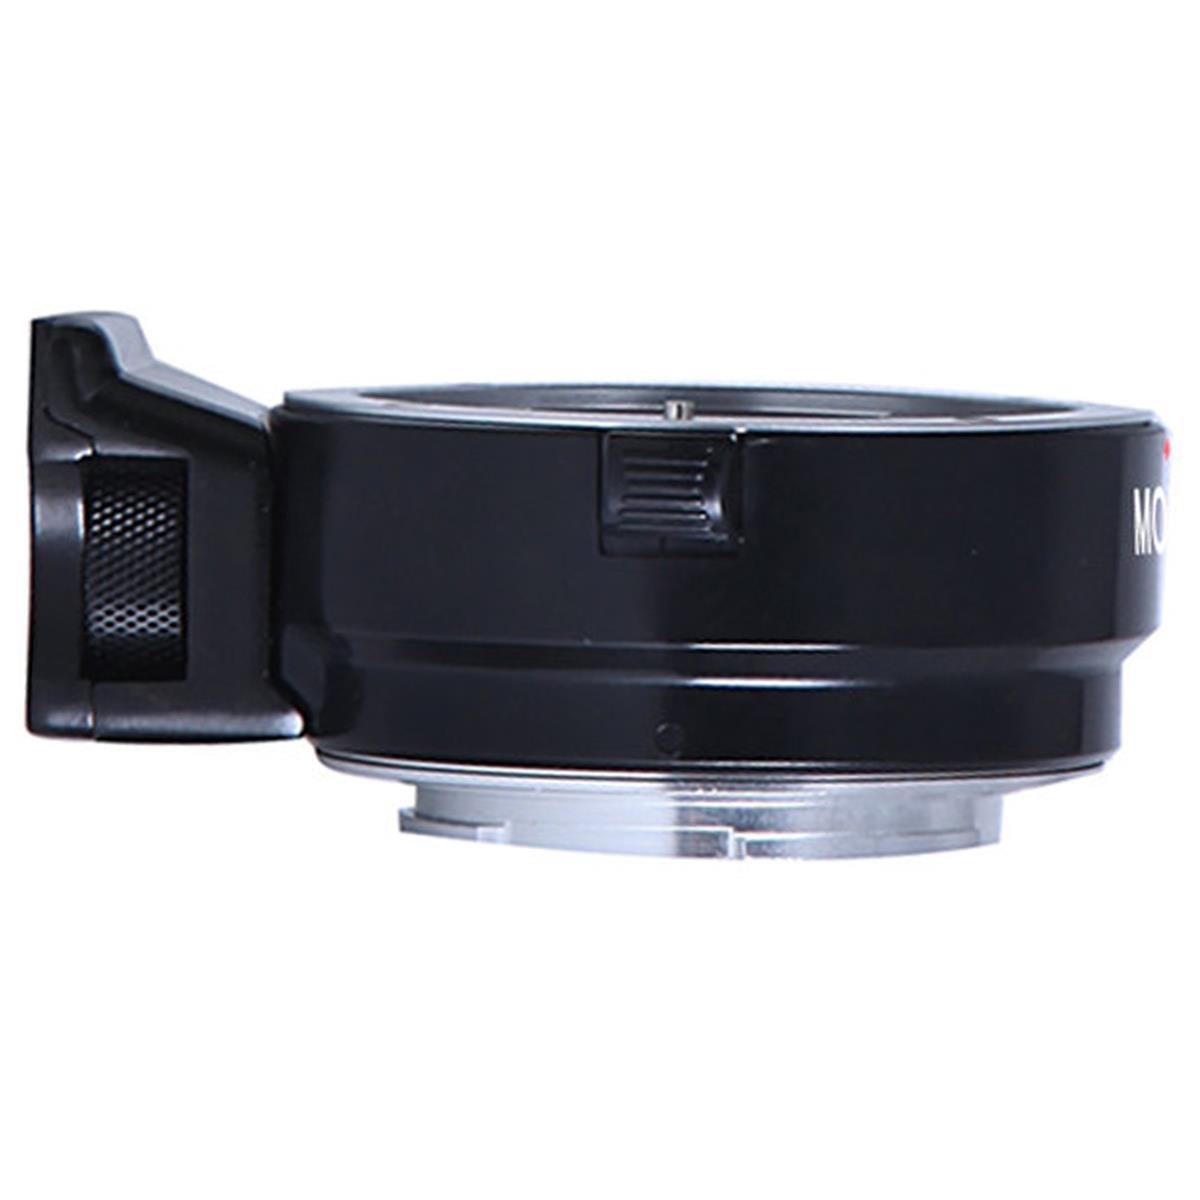 Image of Movo Photo CTS100 Lens Adapter for Canon EOS EF/S Lens to Sony NEX Cameras